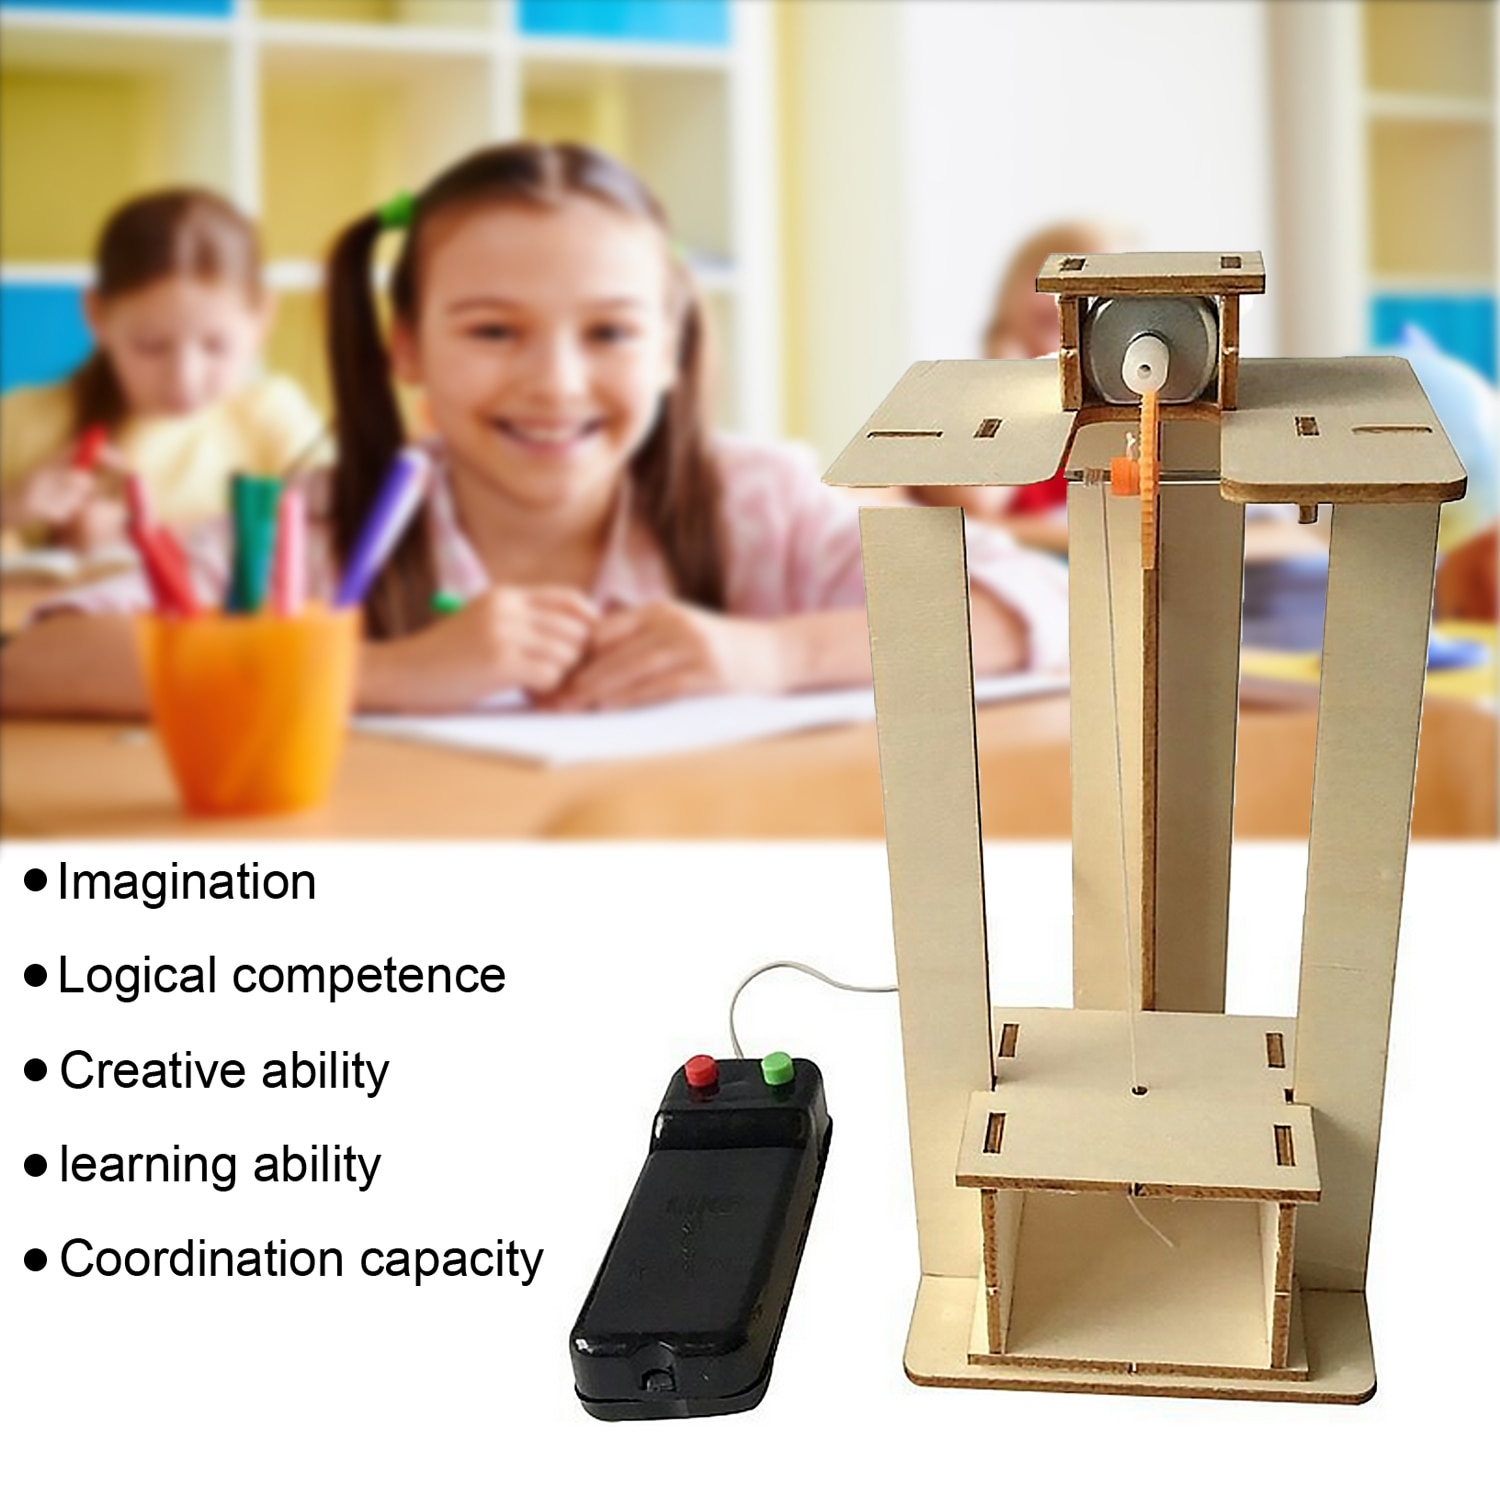 Kids Creative DIY Assembled Wooden Electric Plotter Kit Model Automatic Painting Drawing Robot Science Physics Experiment Toy